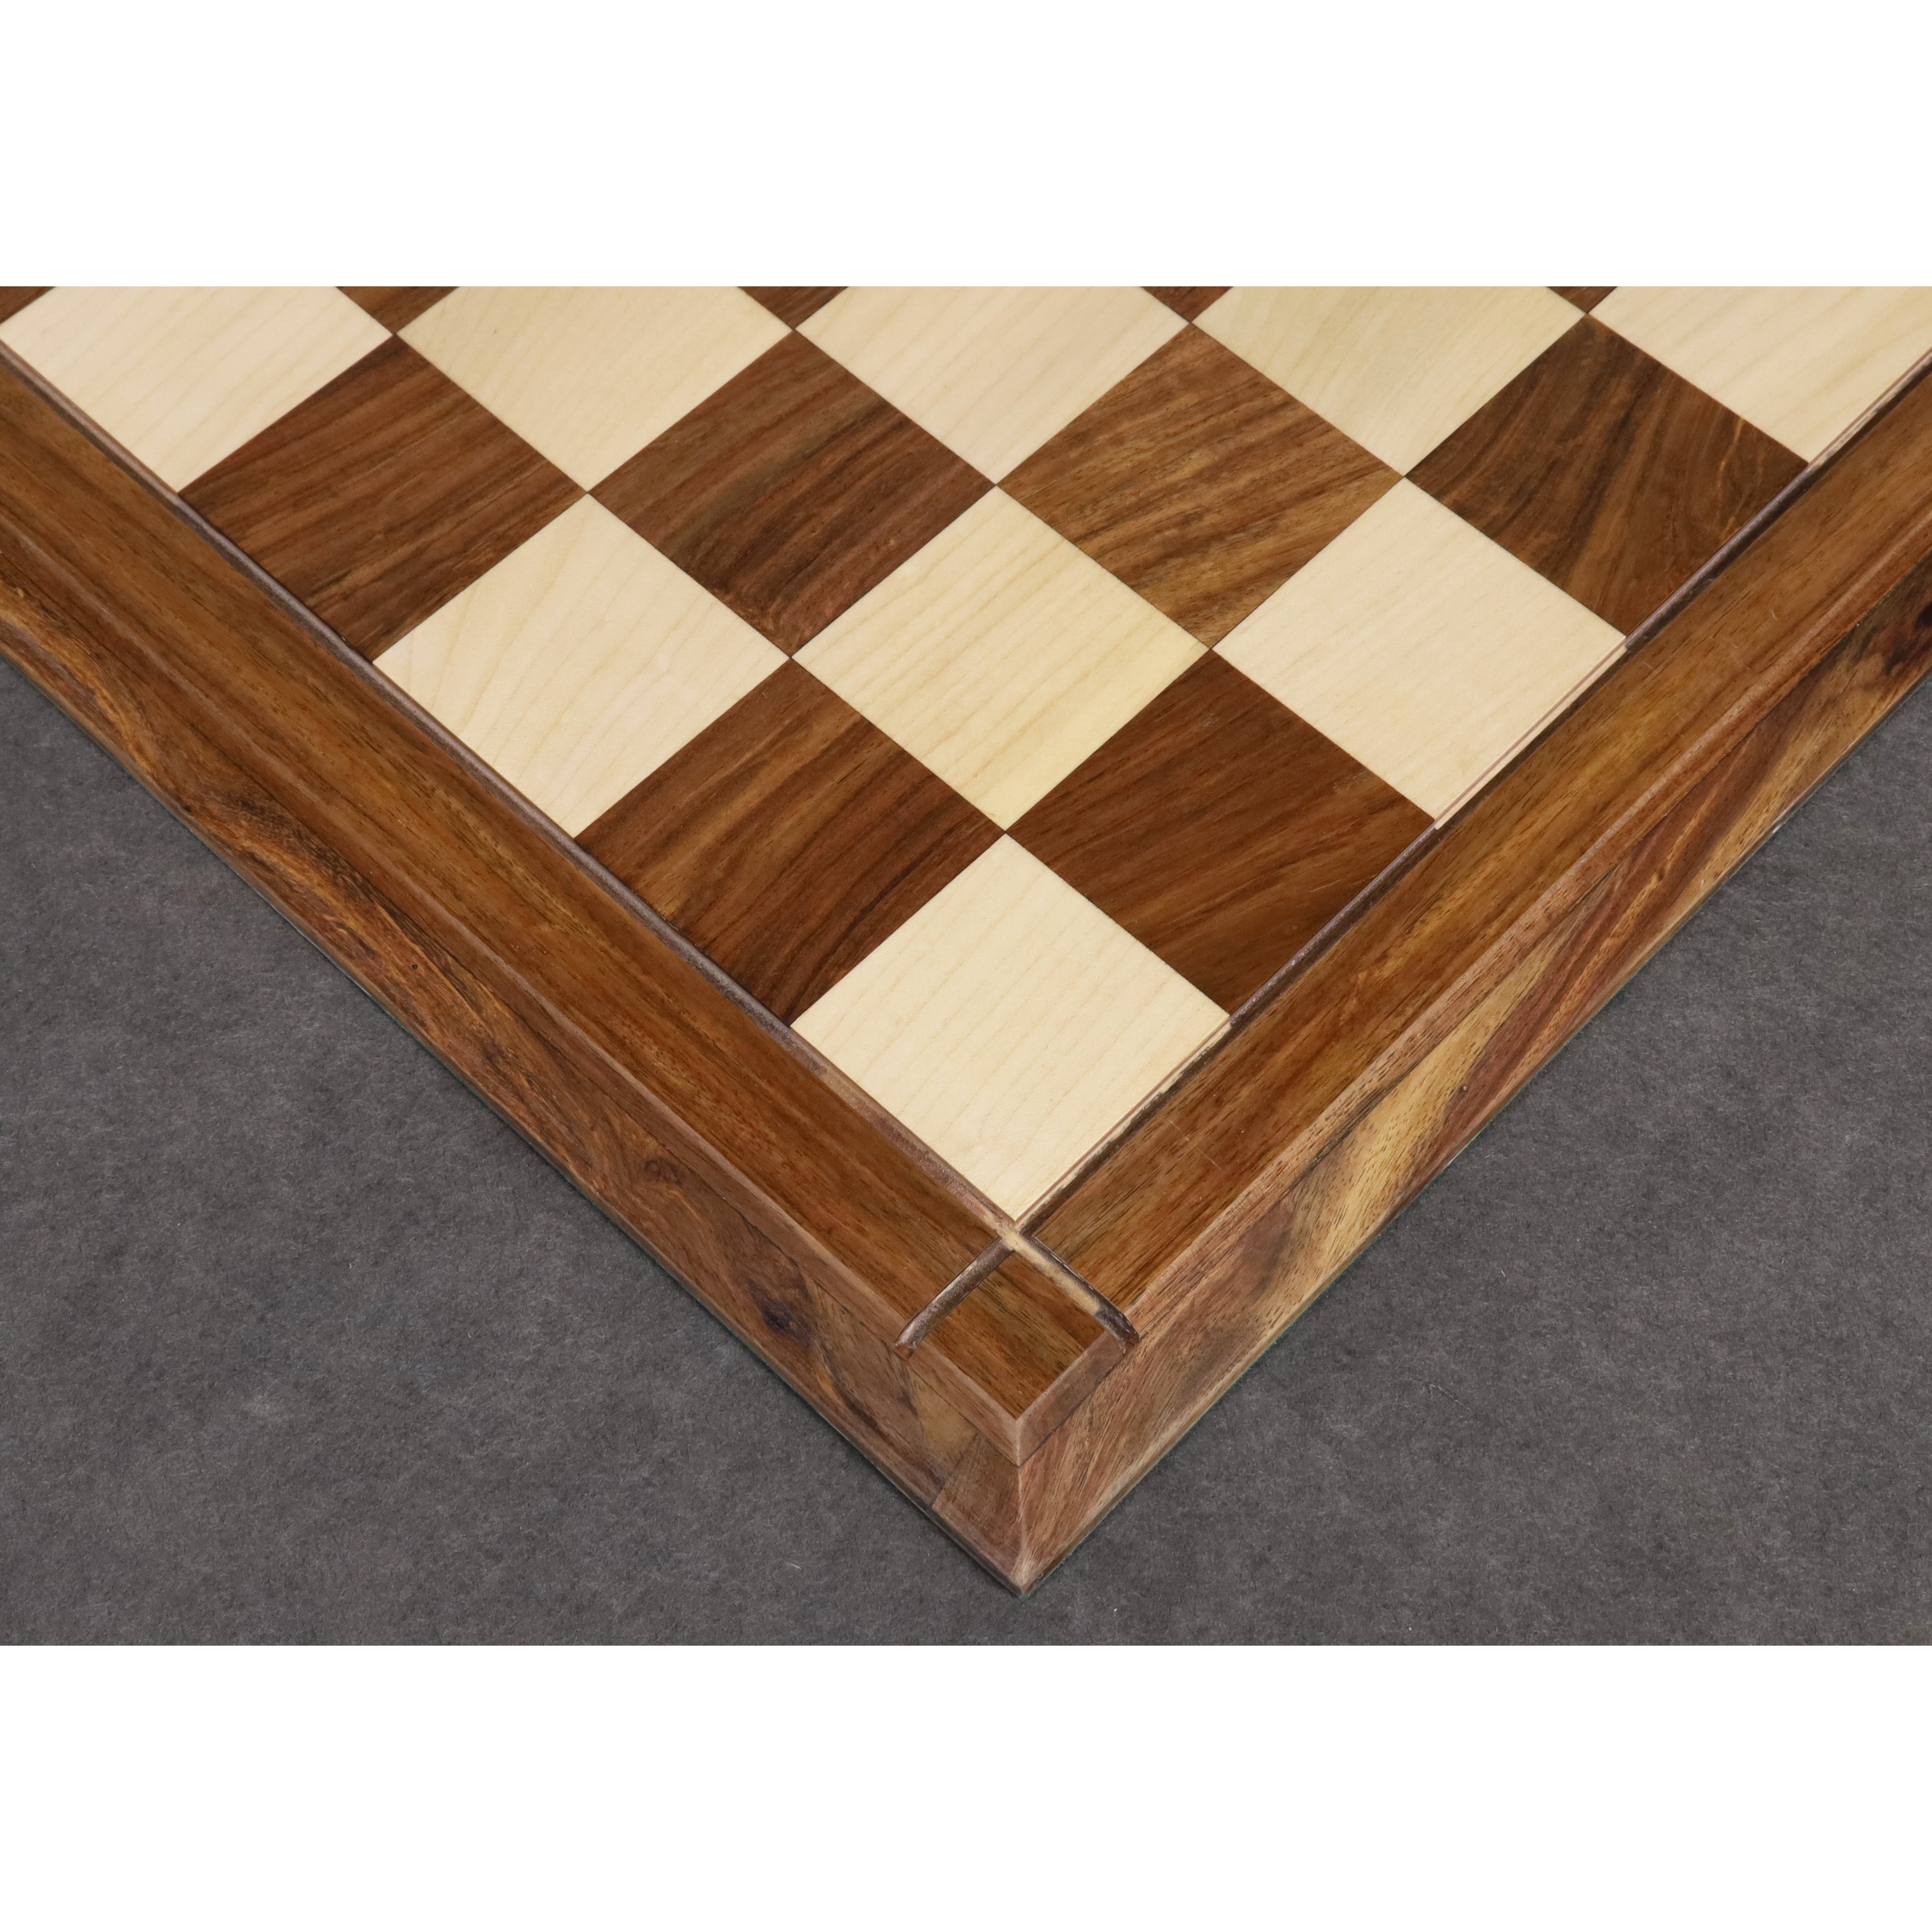 Golden Rosewood & Maple Wood Chess board - Wooden Chess Pieces - Professional Chess Set